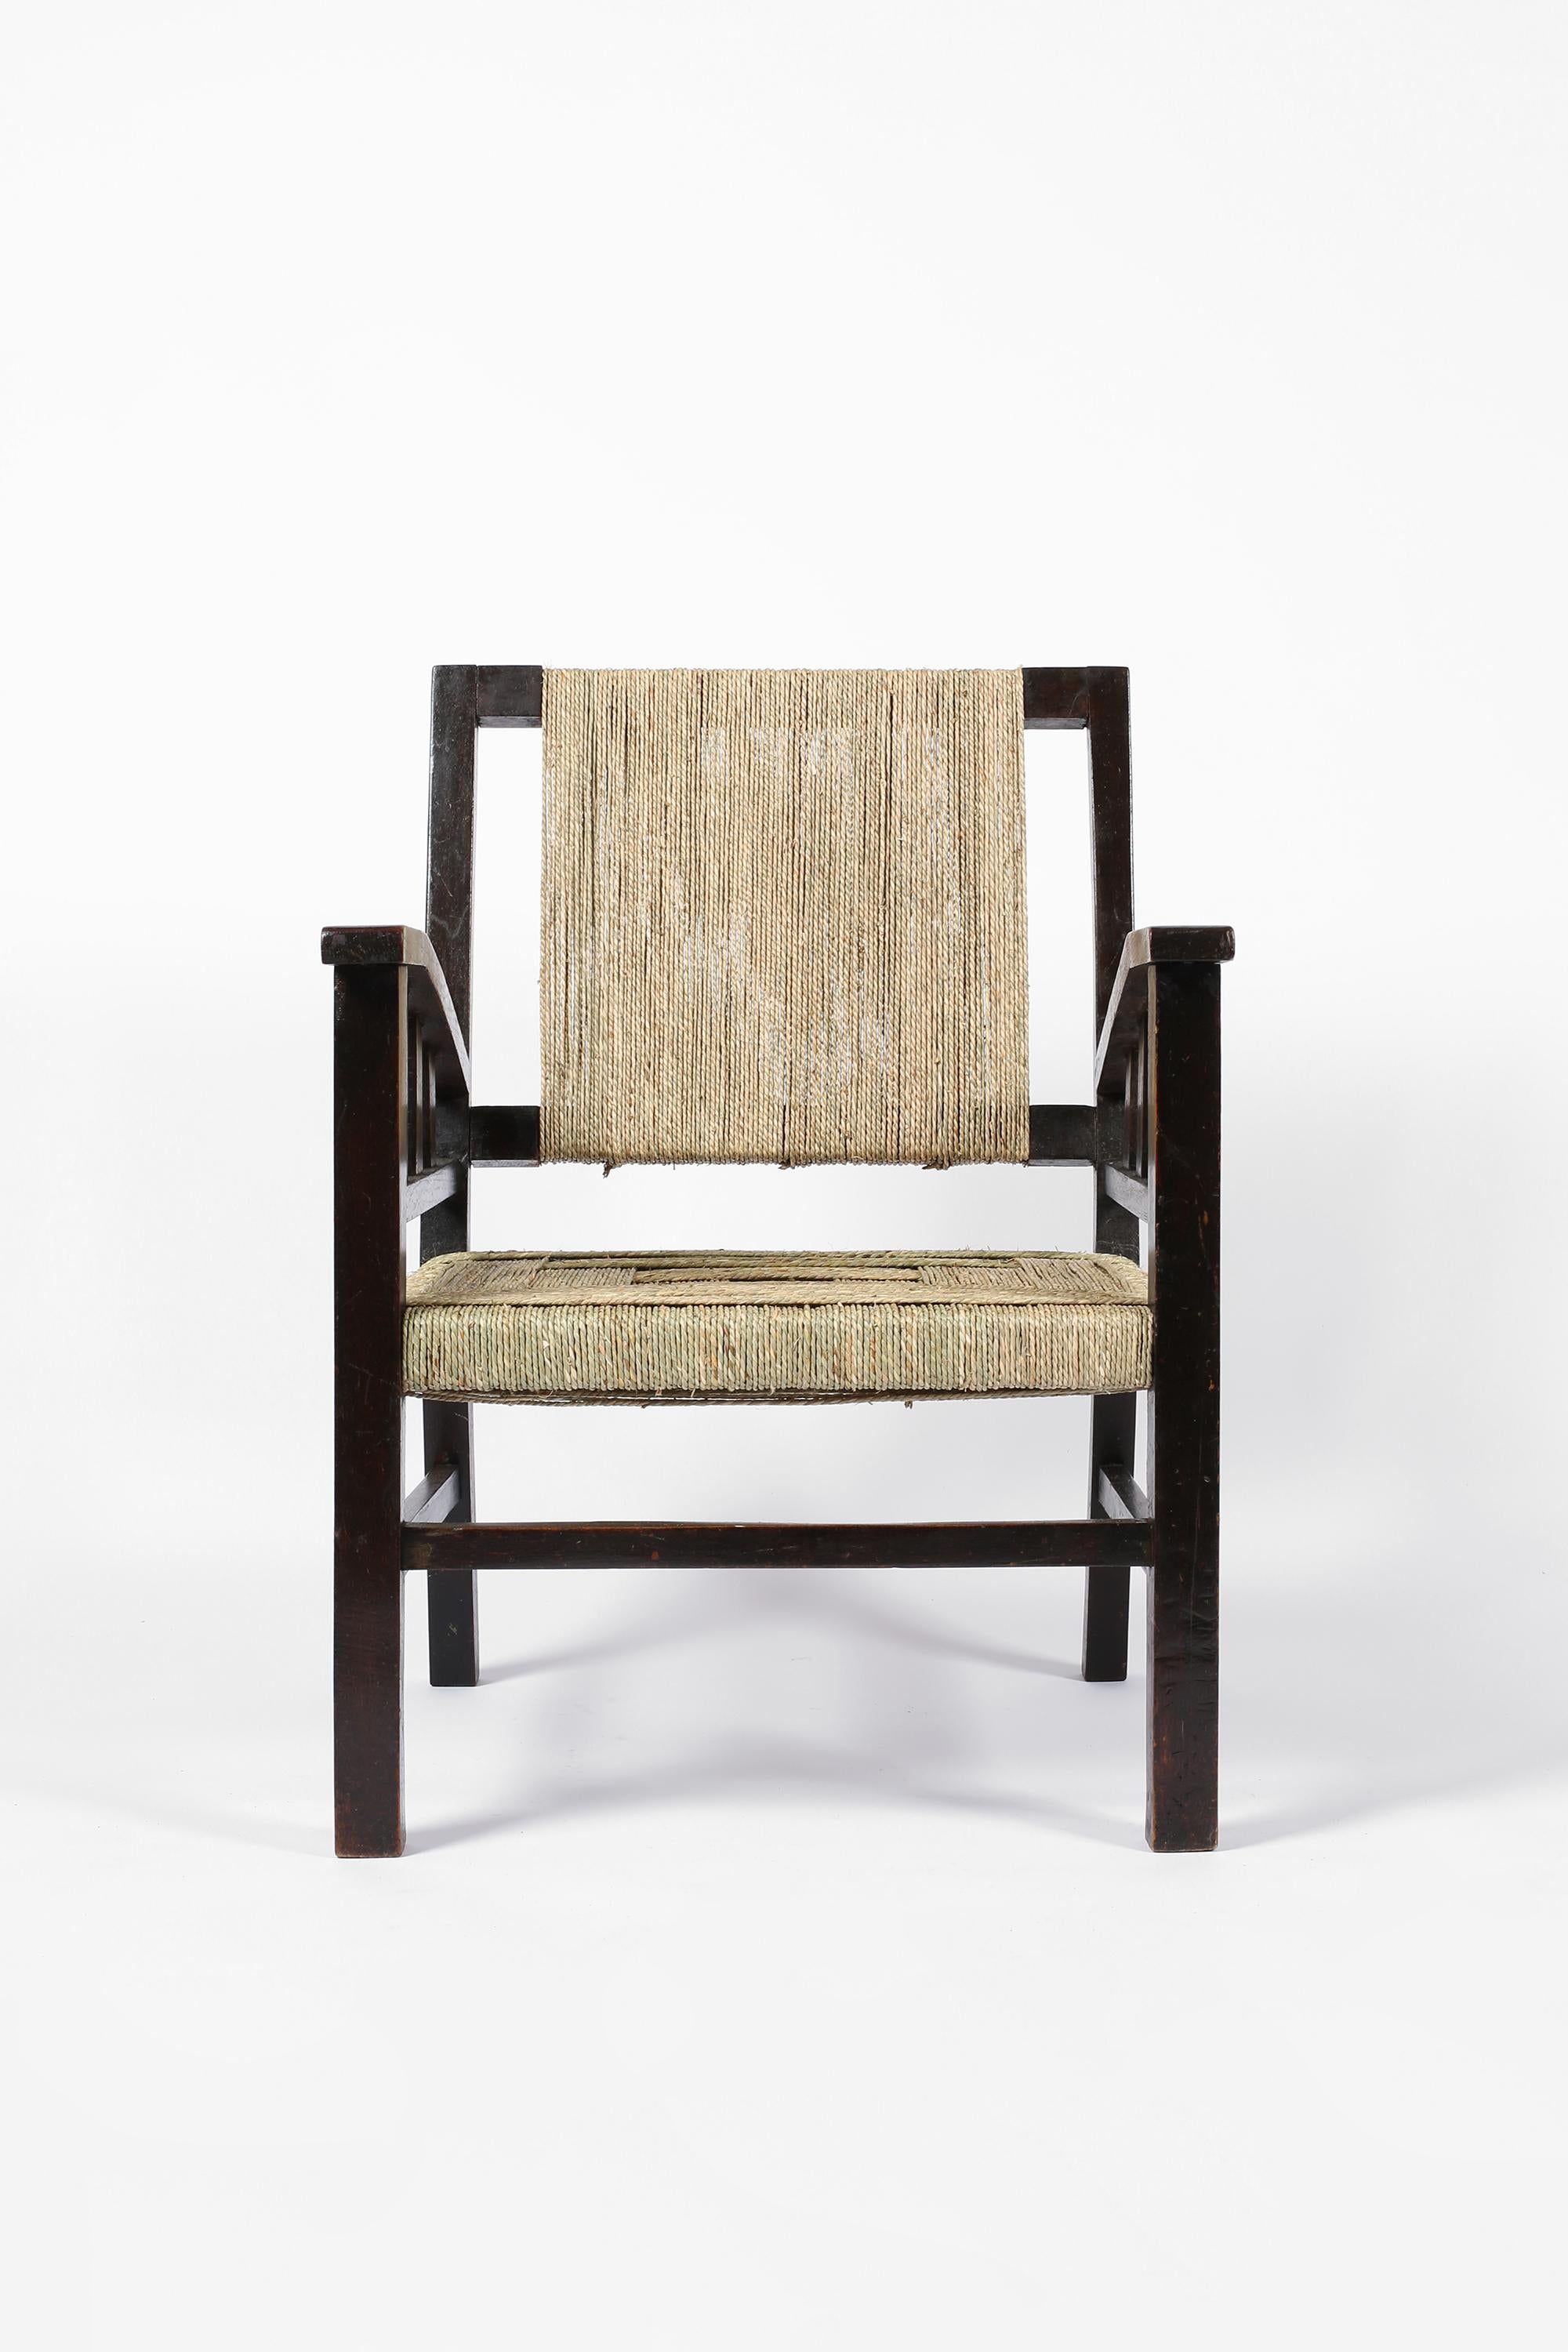 Hand-Woven 1930s French Modernist Art Deco Armchair by Francis Jourdain in Beech and Rope